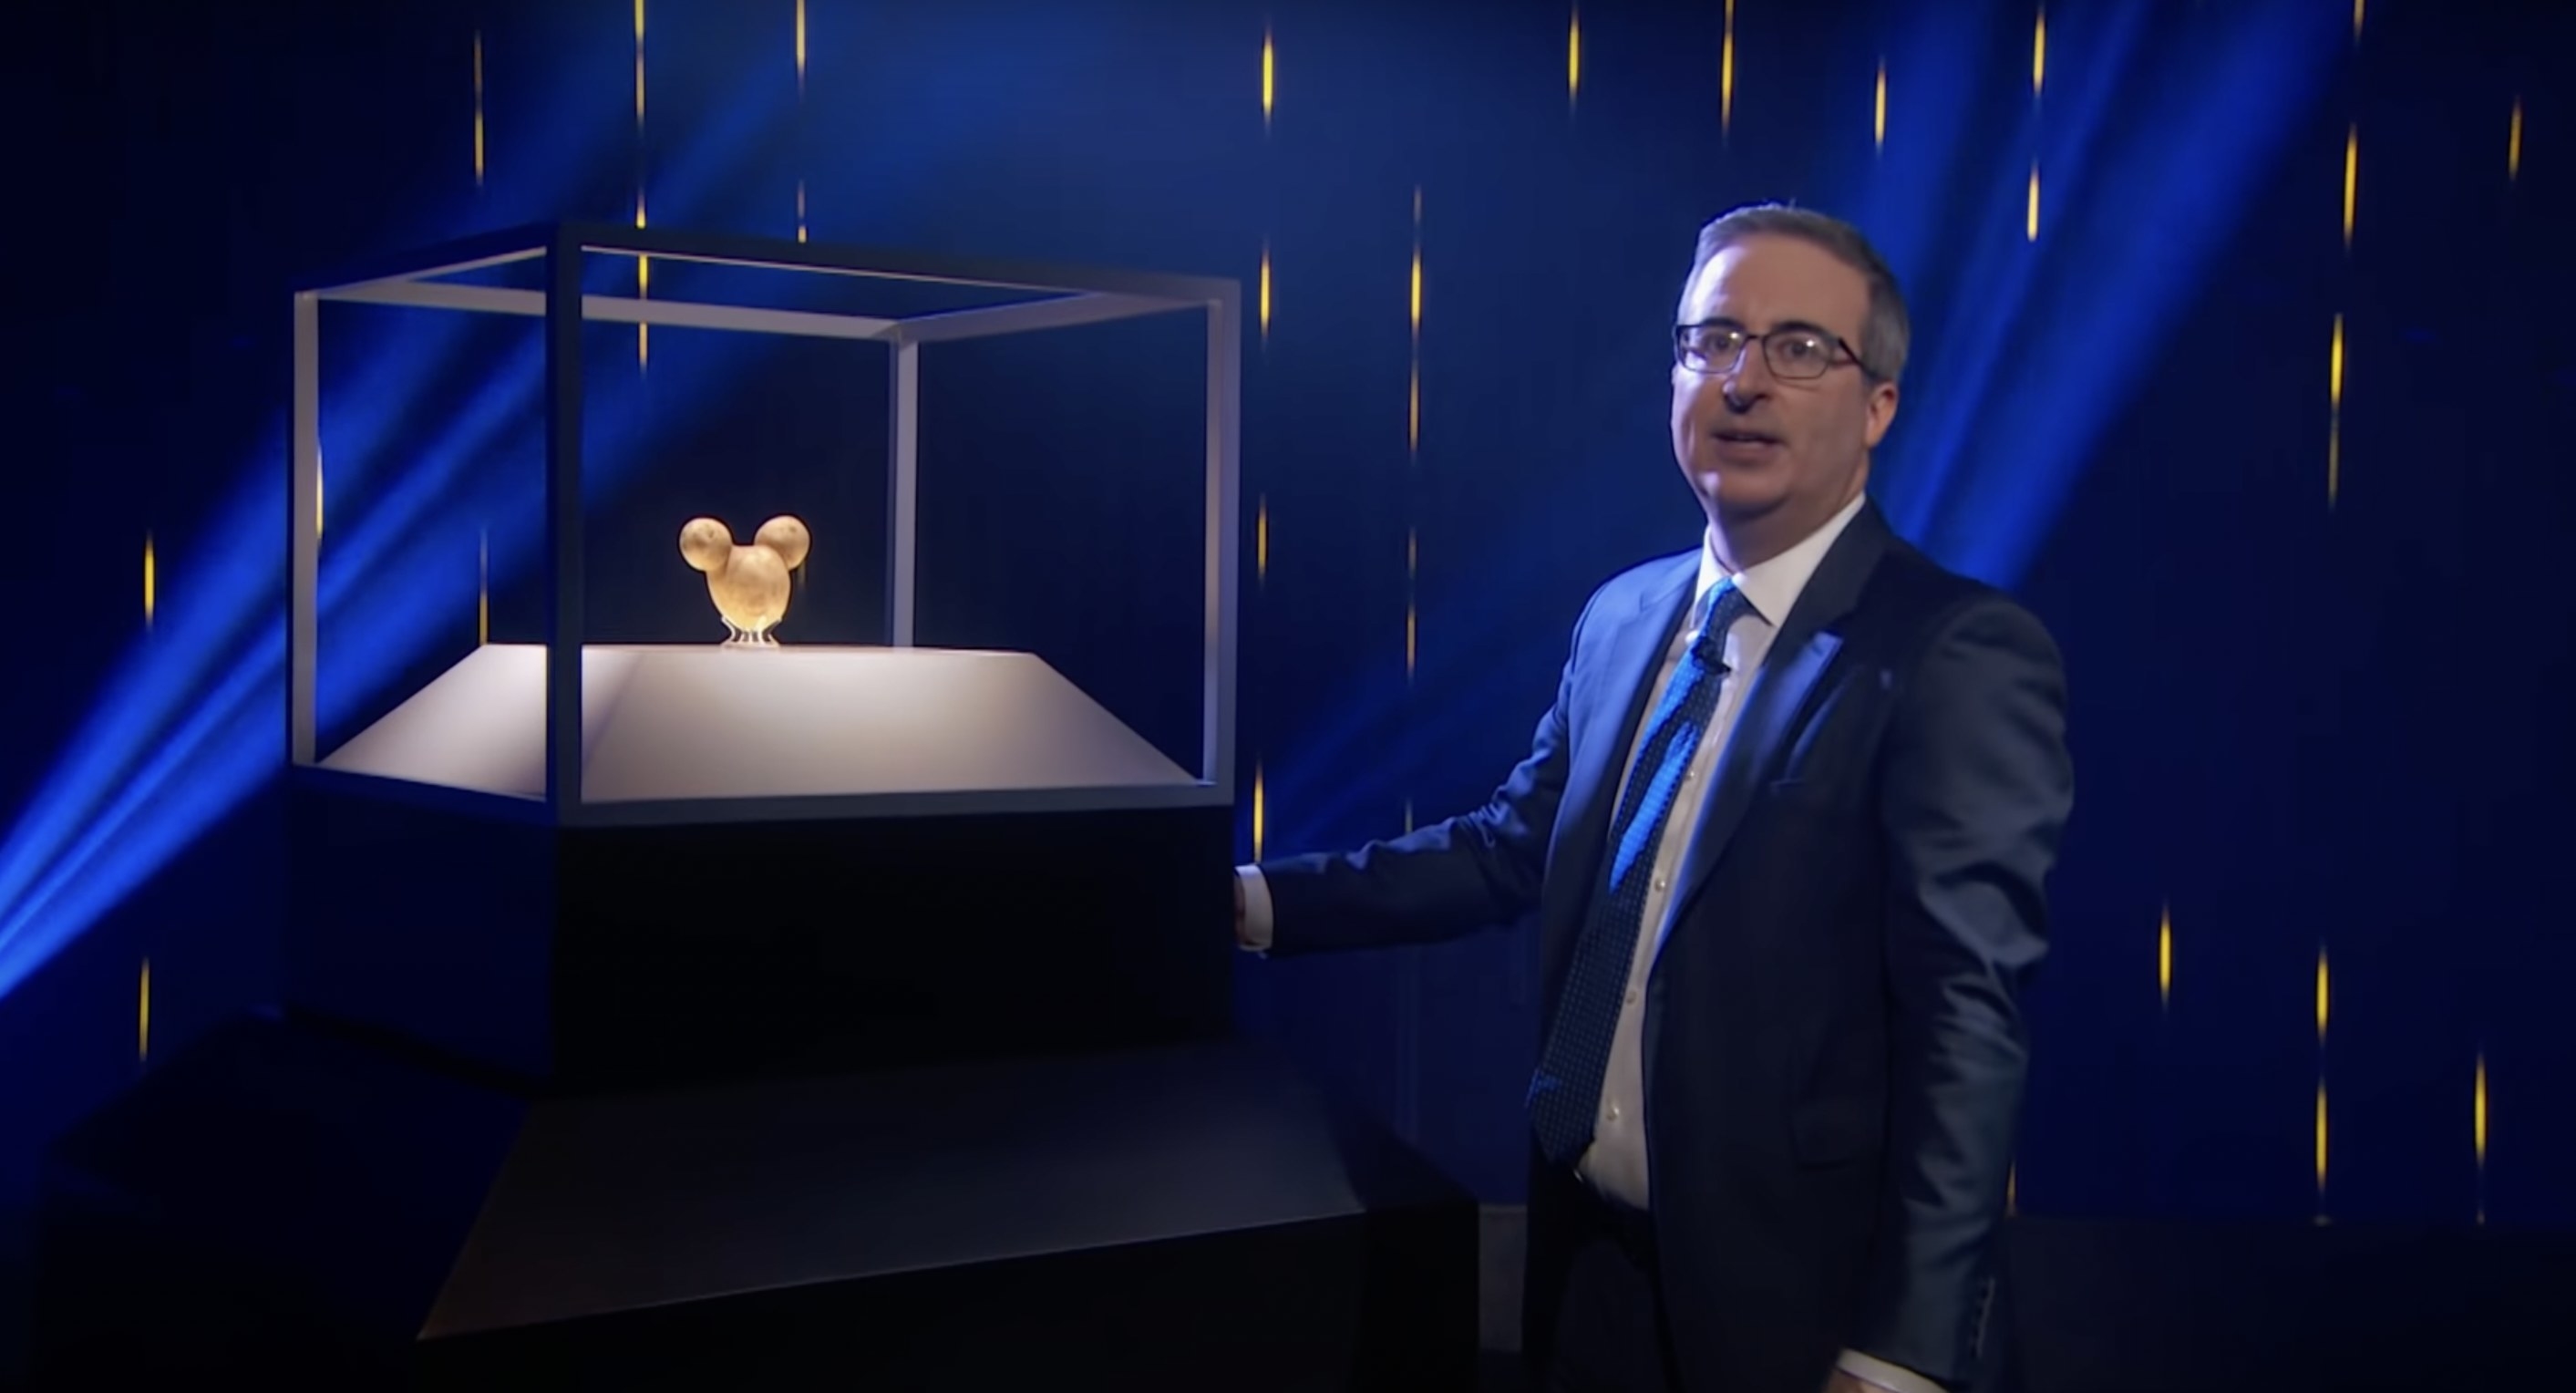 John Oliver standing next to a potato that looks like the shape of Mickey Mouse